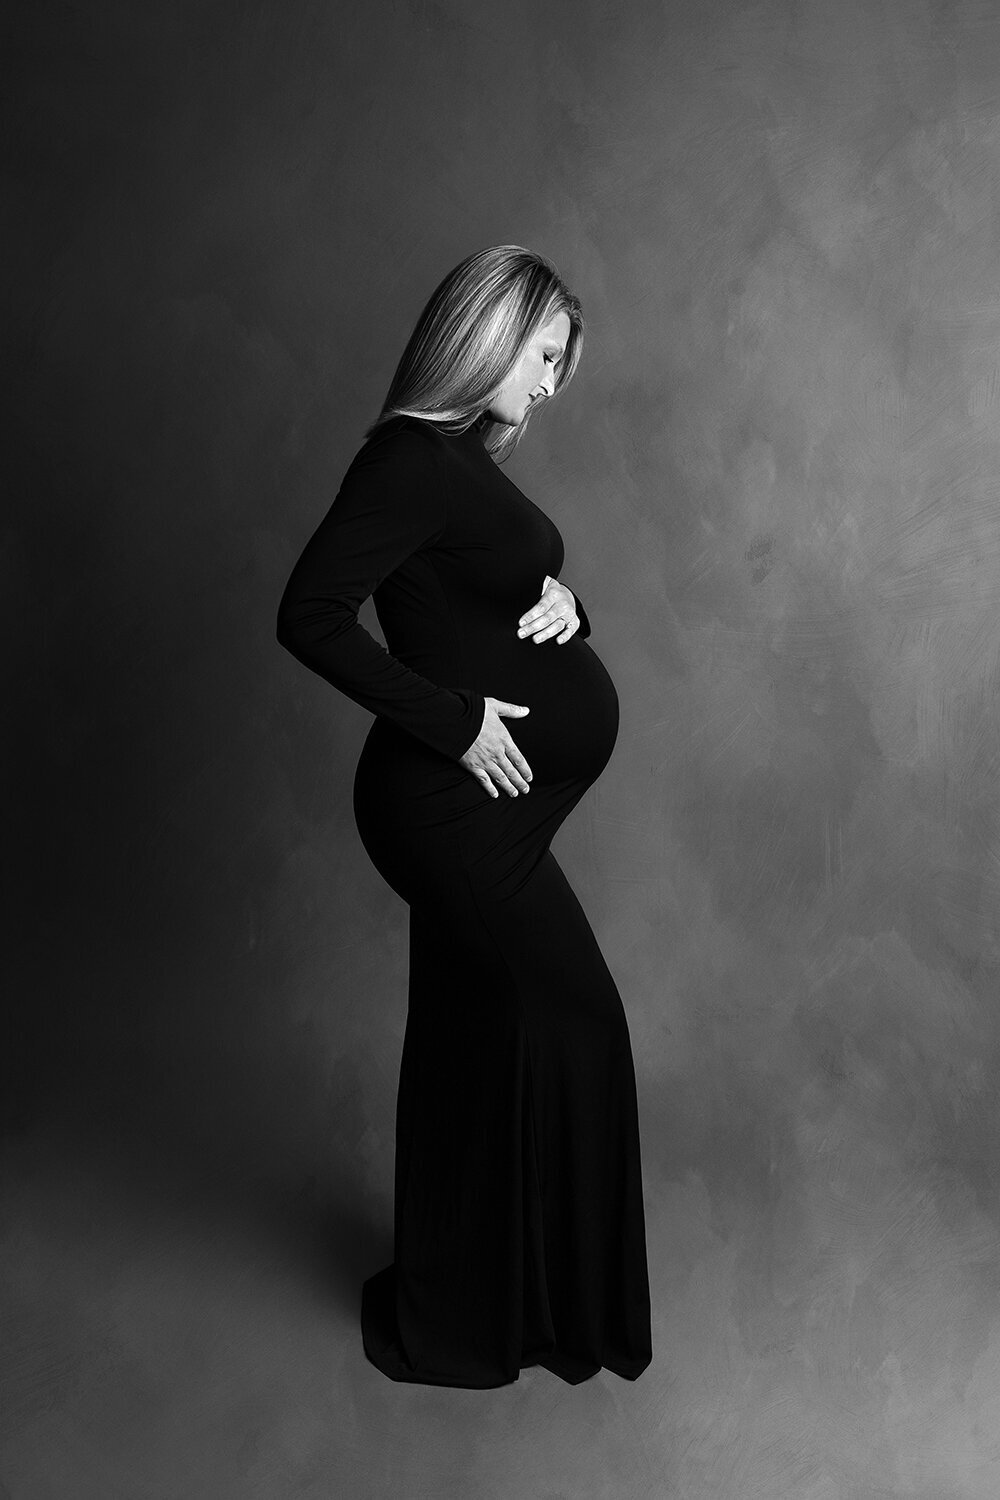 B&W image of a pregnant woman in a black maternity gown with hands on her bump